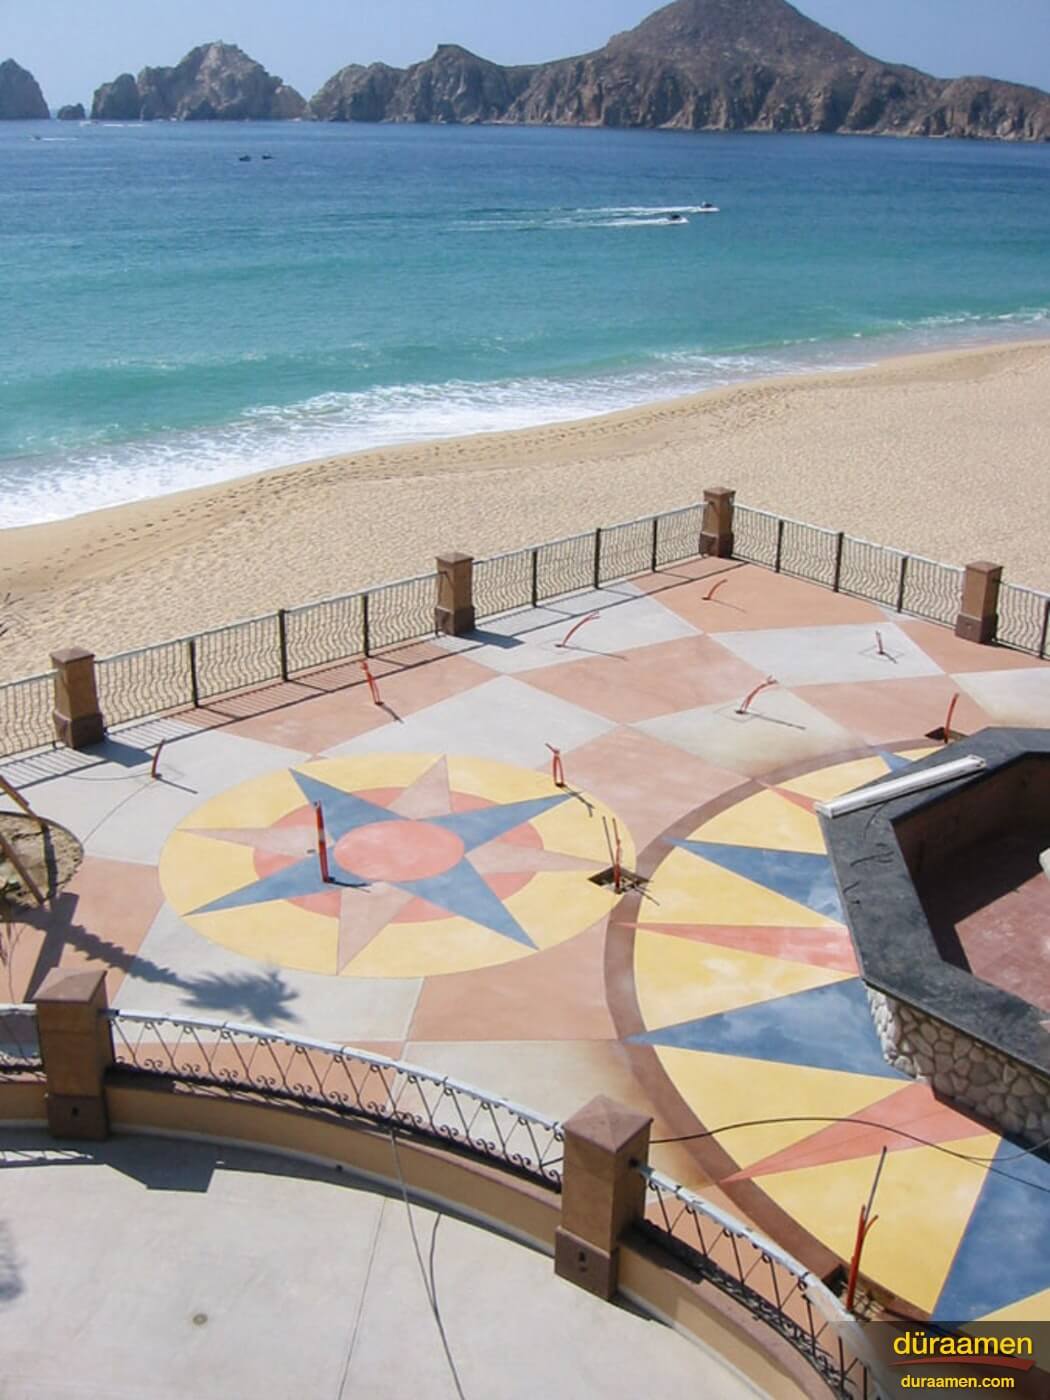 The view of the ocean and the decorative exterior concrete patio at this Mexican resort is spectacular Exterior Concrete Resurfacing in a resort in Cabo San Lucas | Duraamen Engineered Products Inc